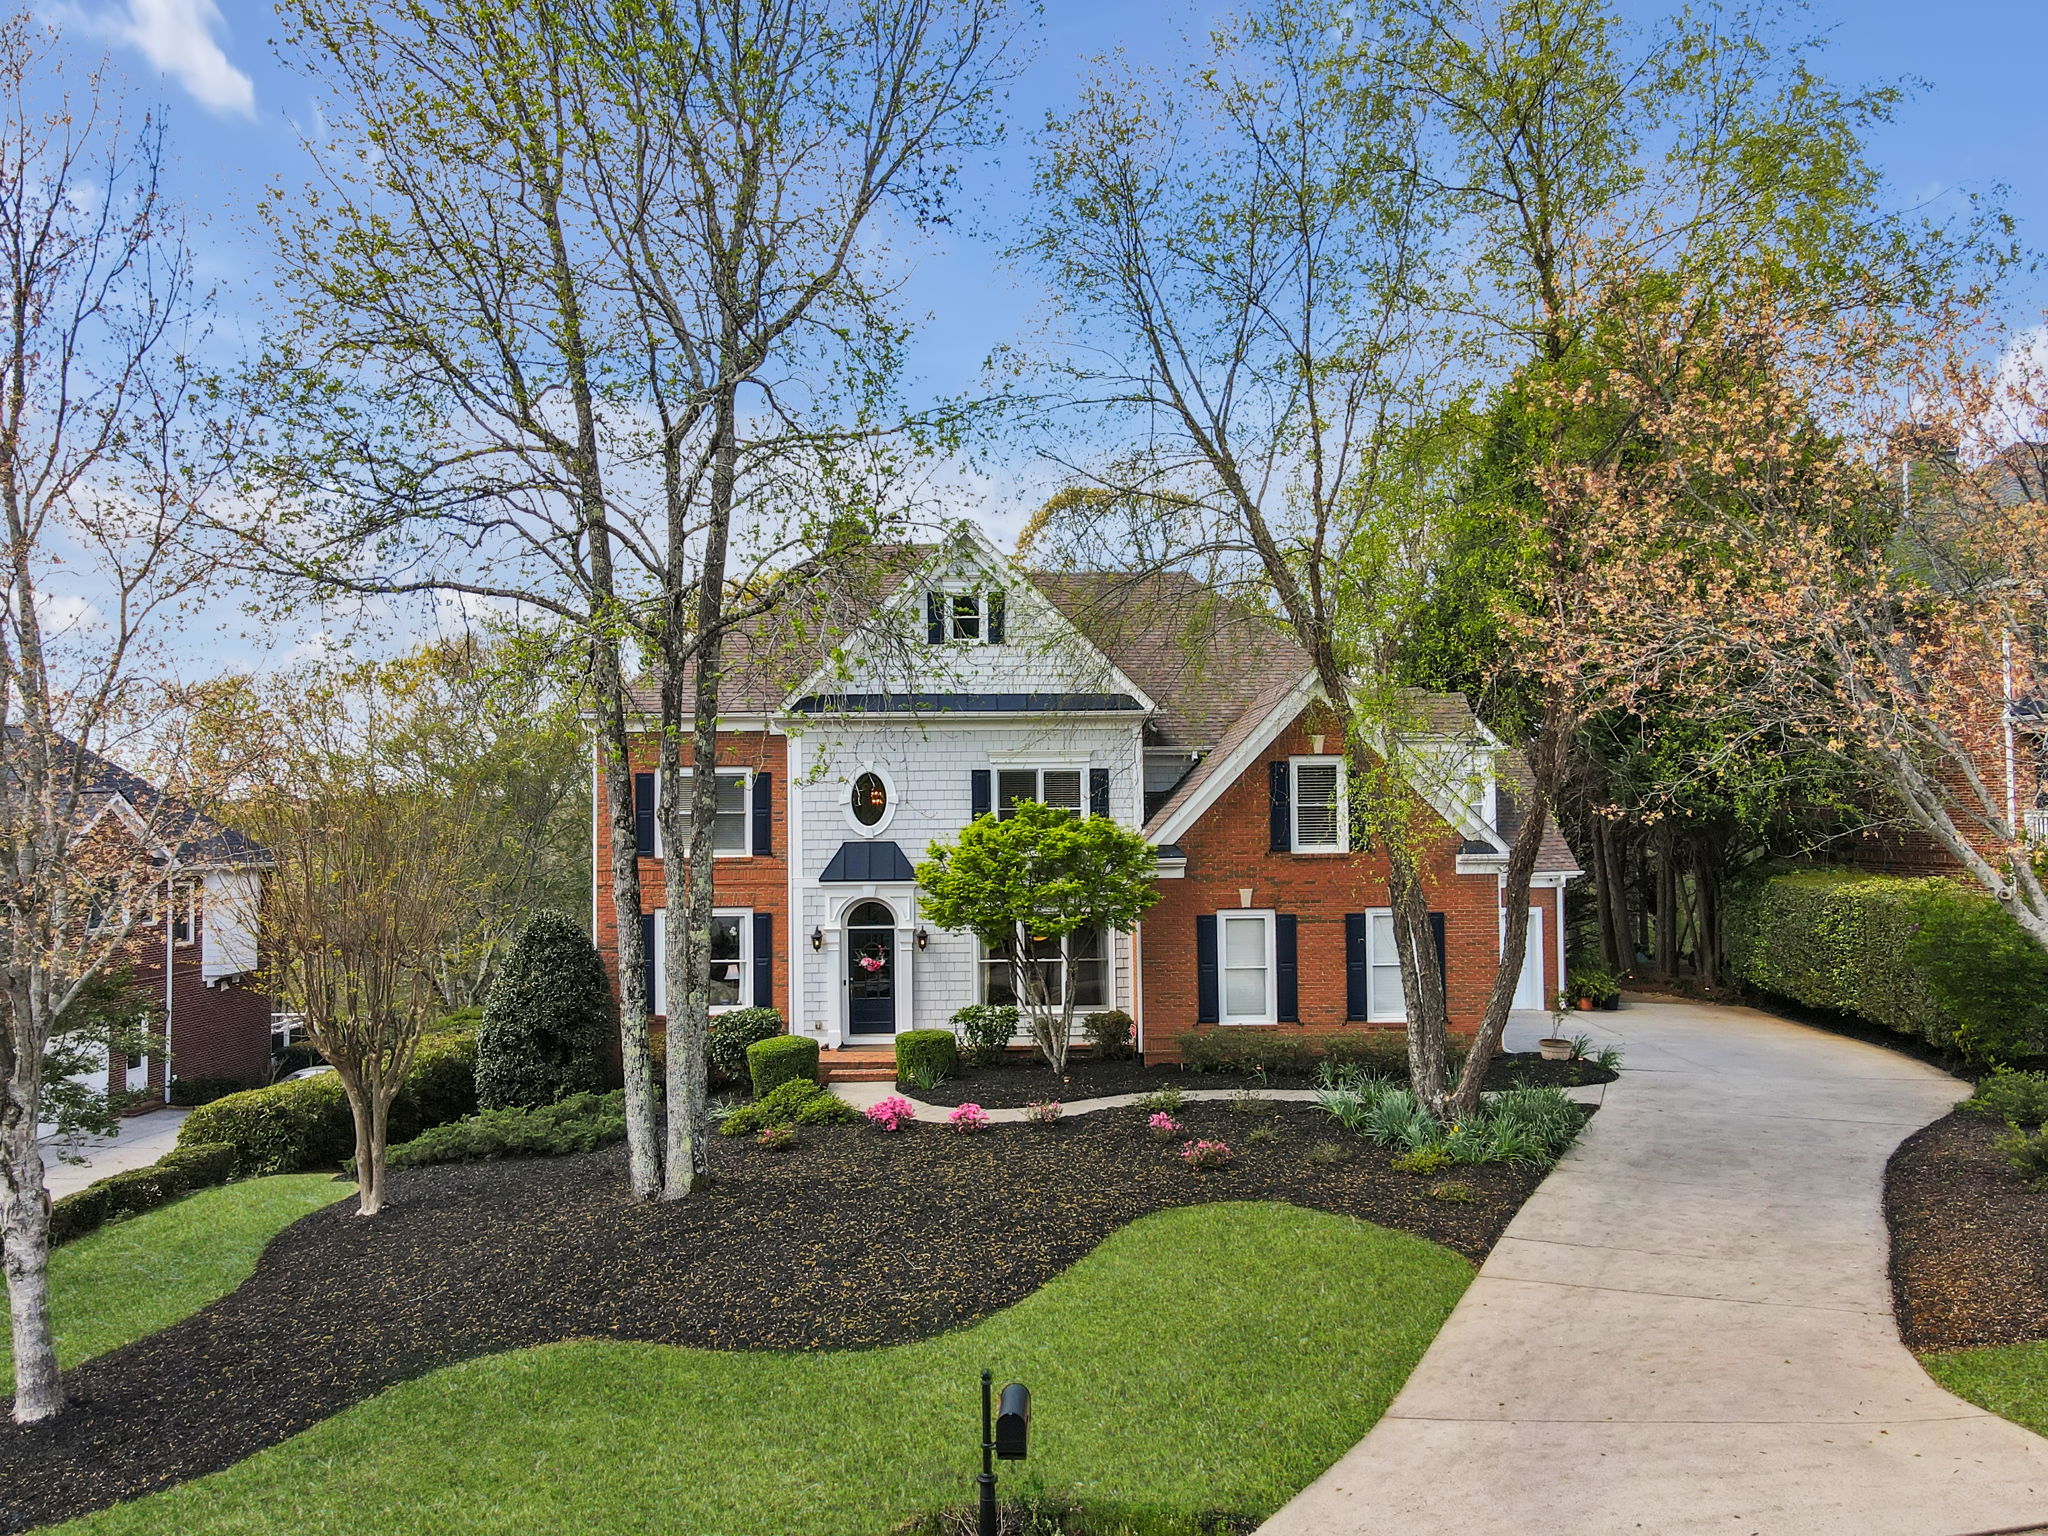 Professionally landscaped East facing home